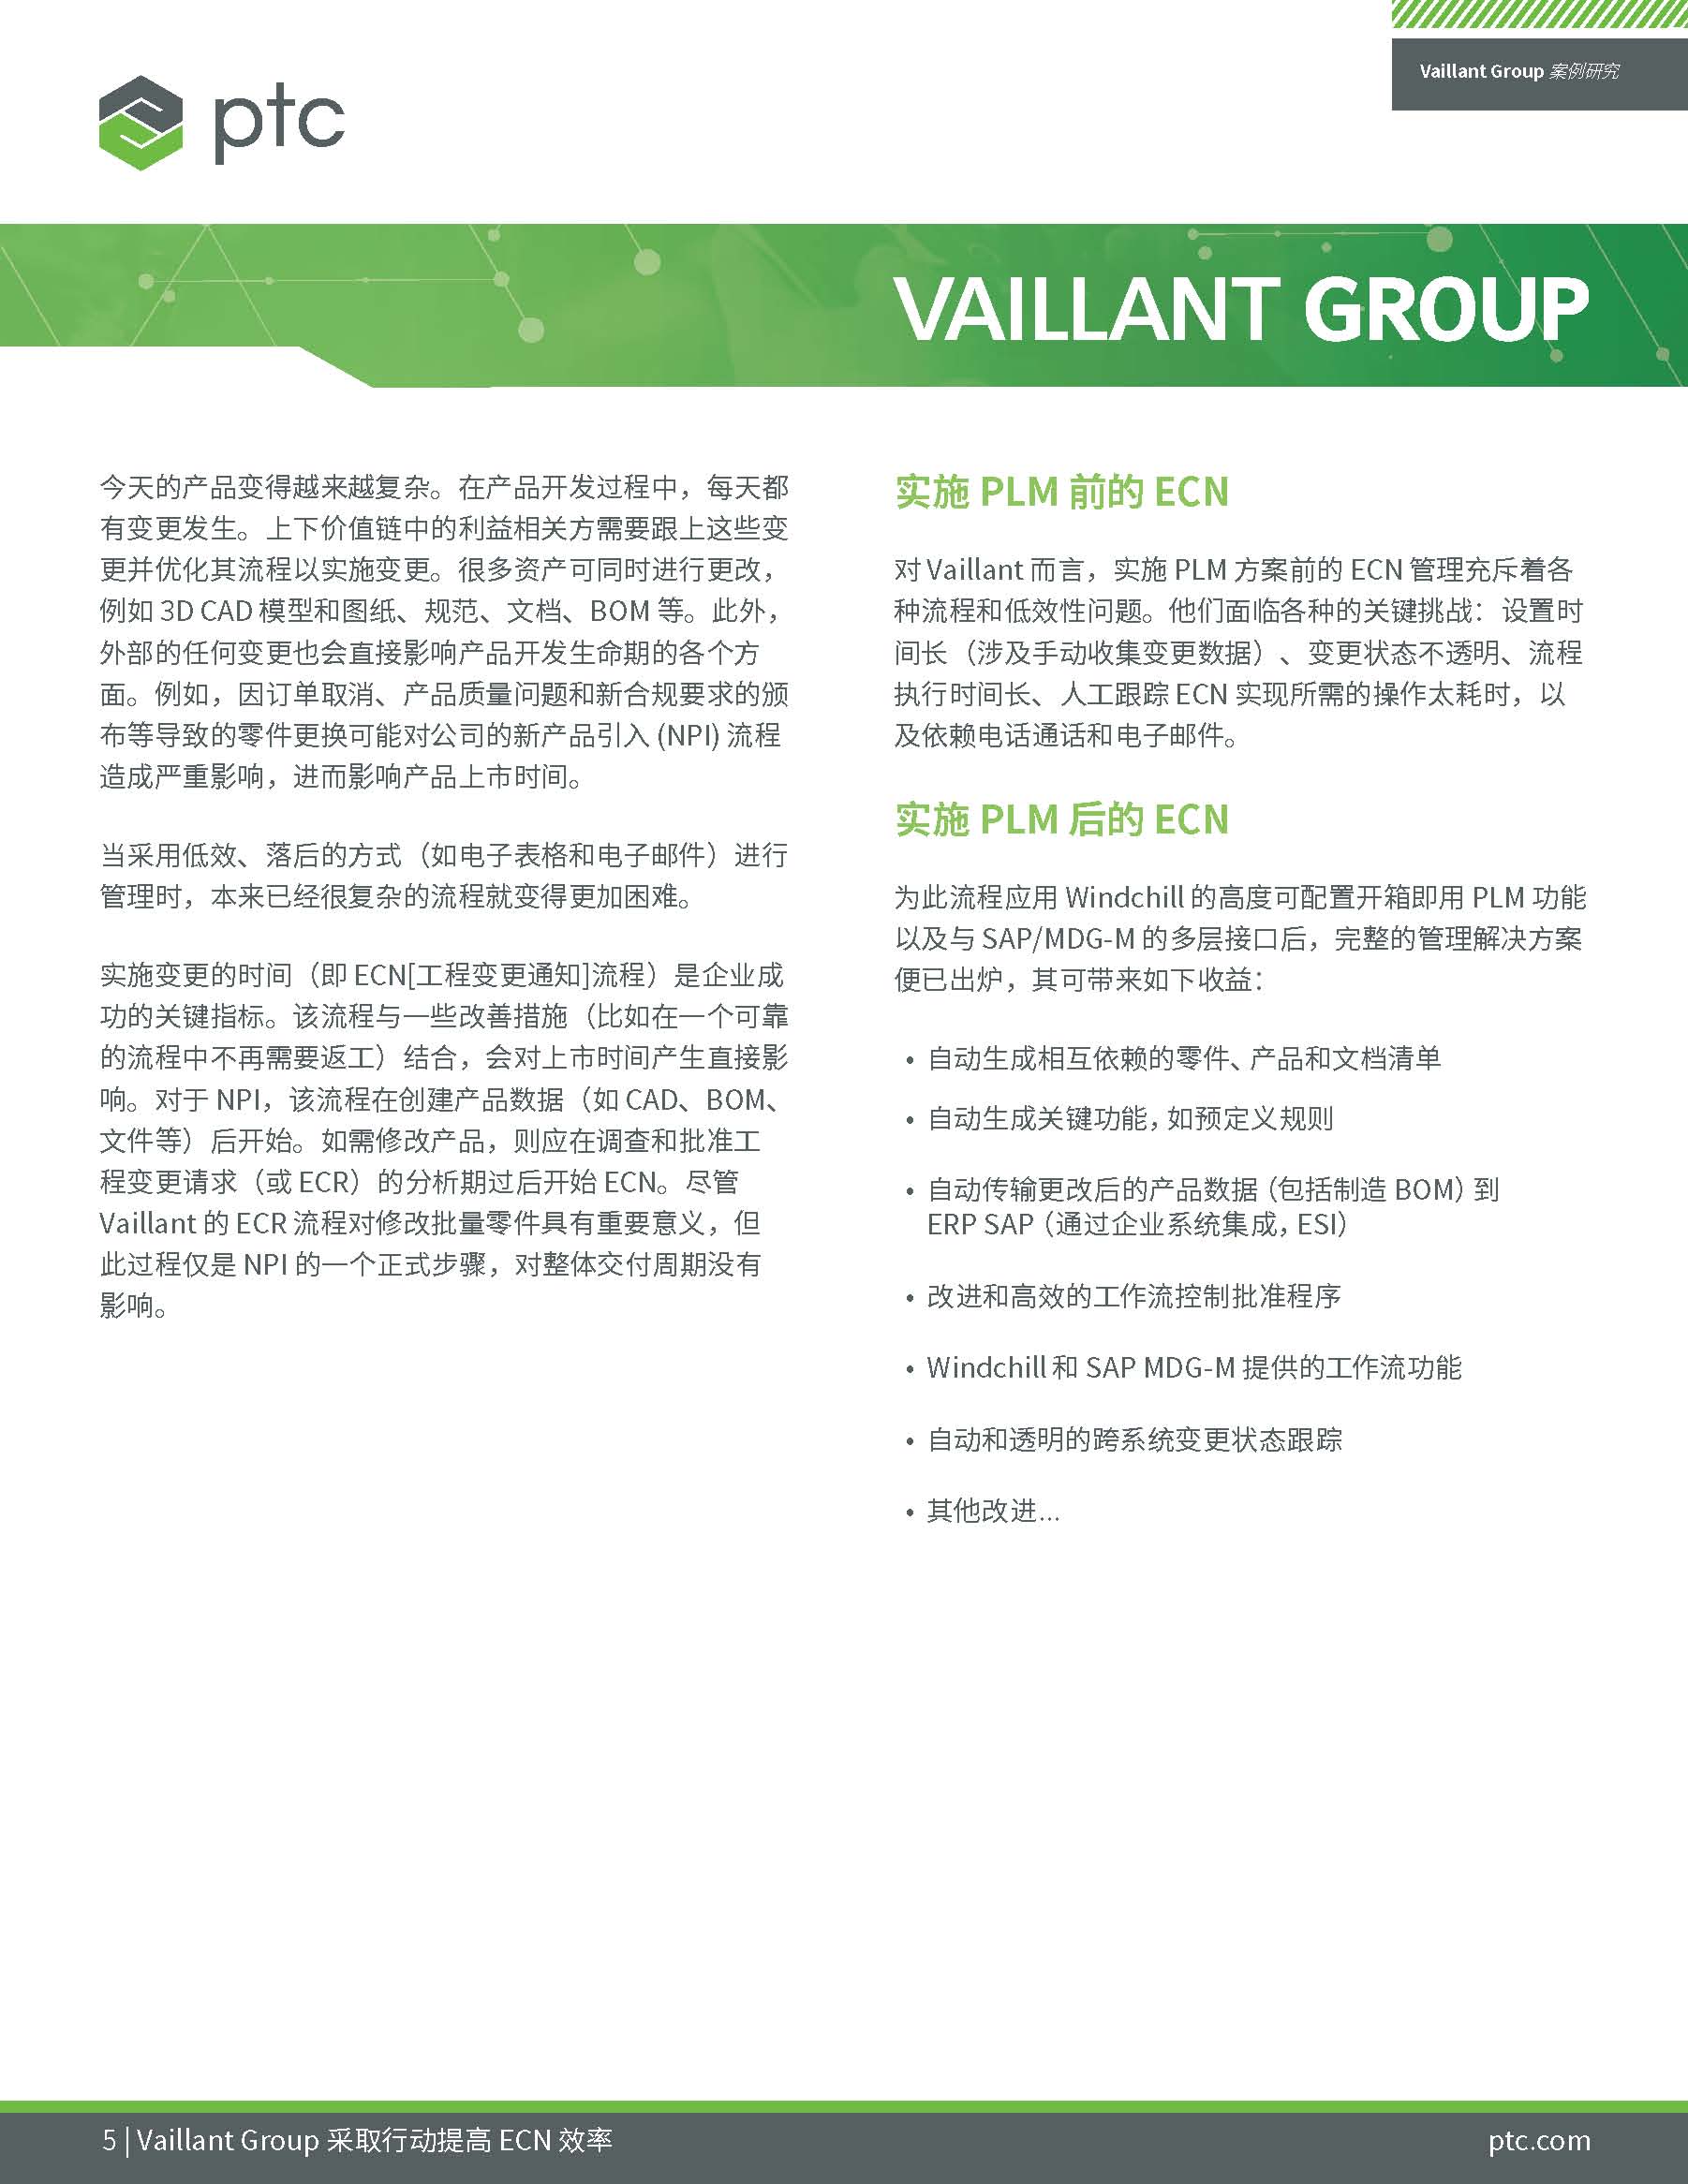 Vaillant Group's Digital Transformation (Chinese)_页面_05.jpg